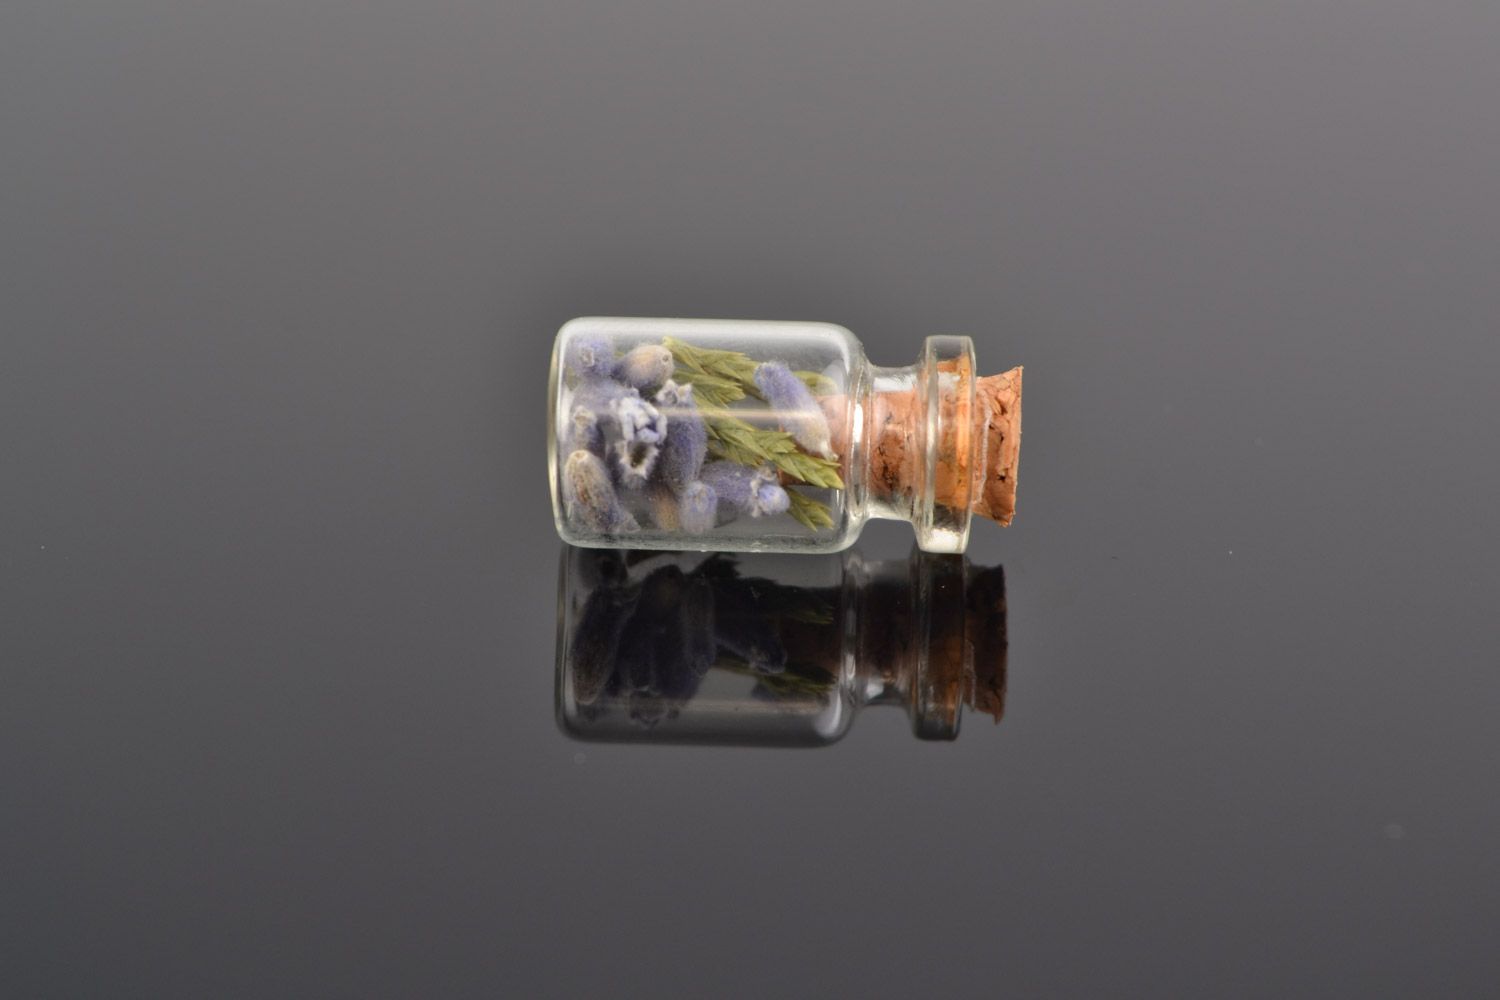 Handmade neck pendant in the shape of glass flask with lavender and juniper inside photo 1